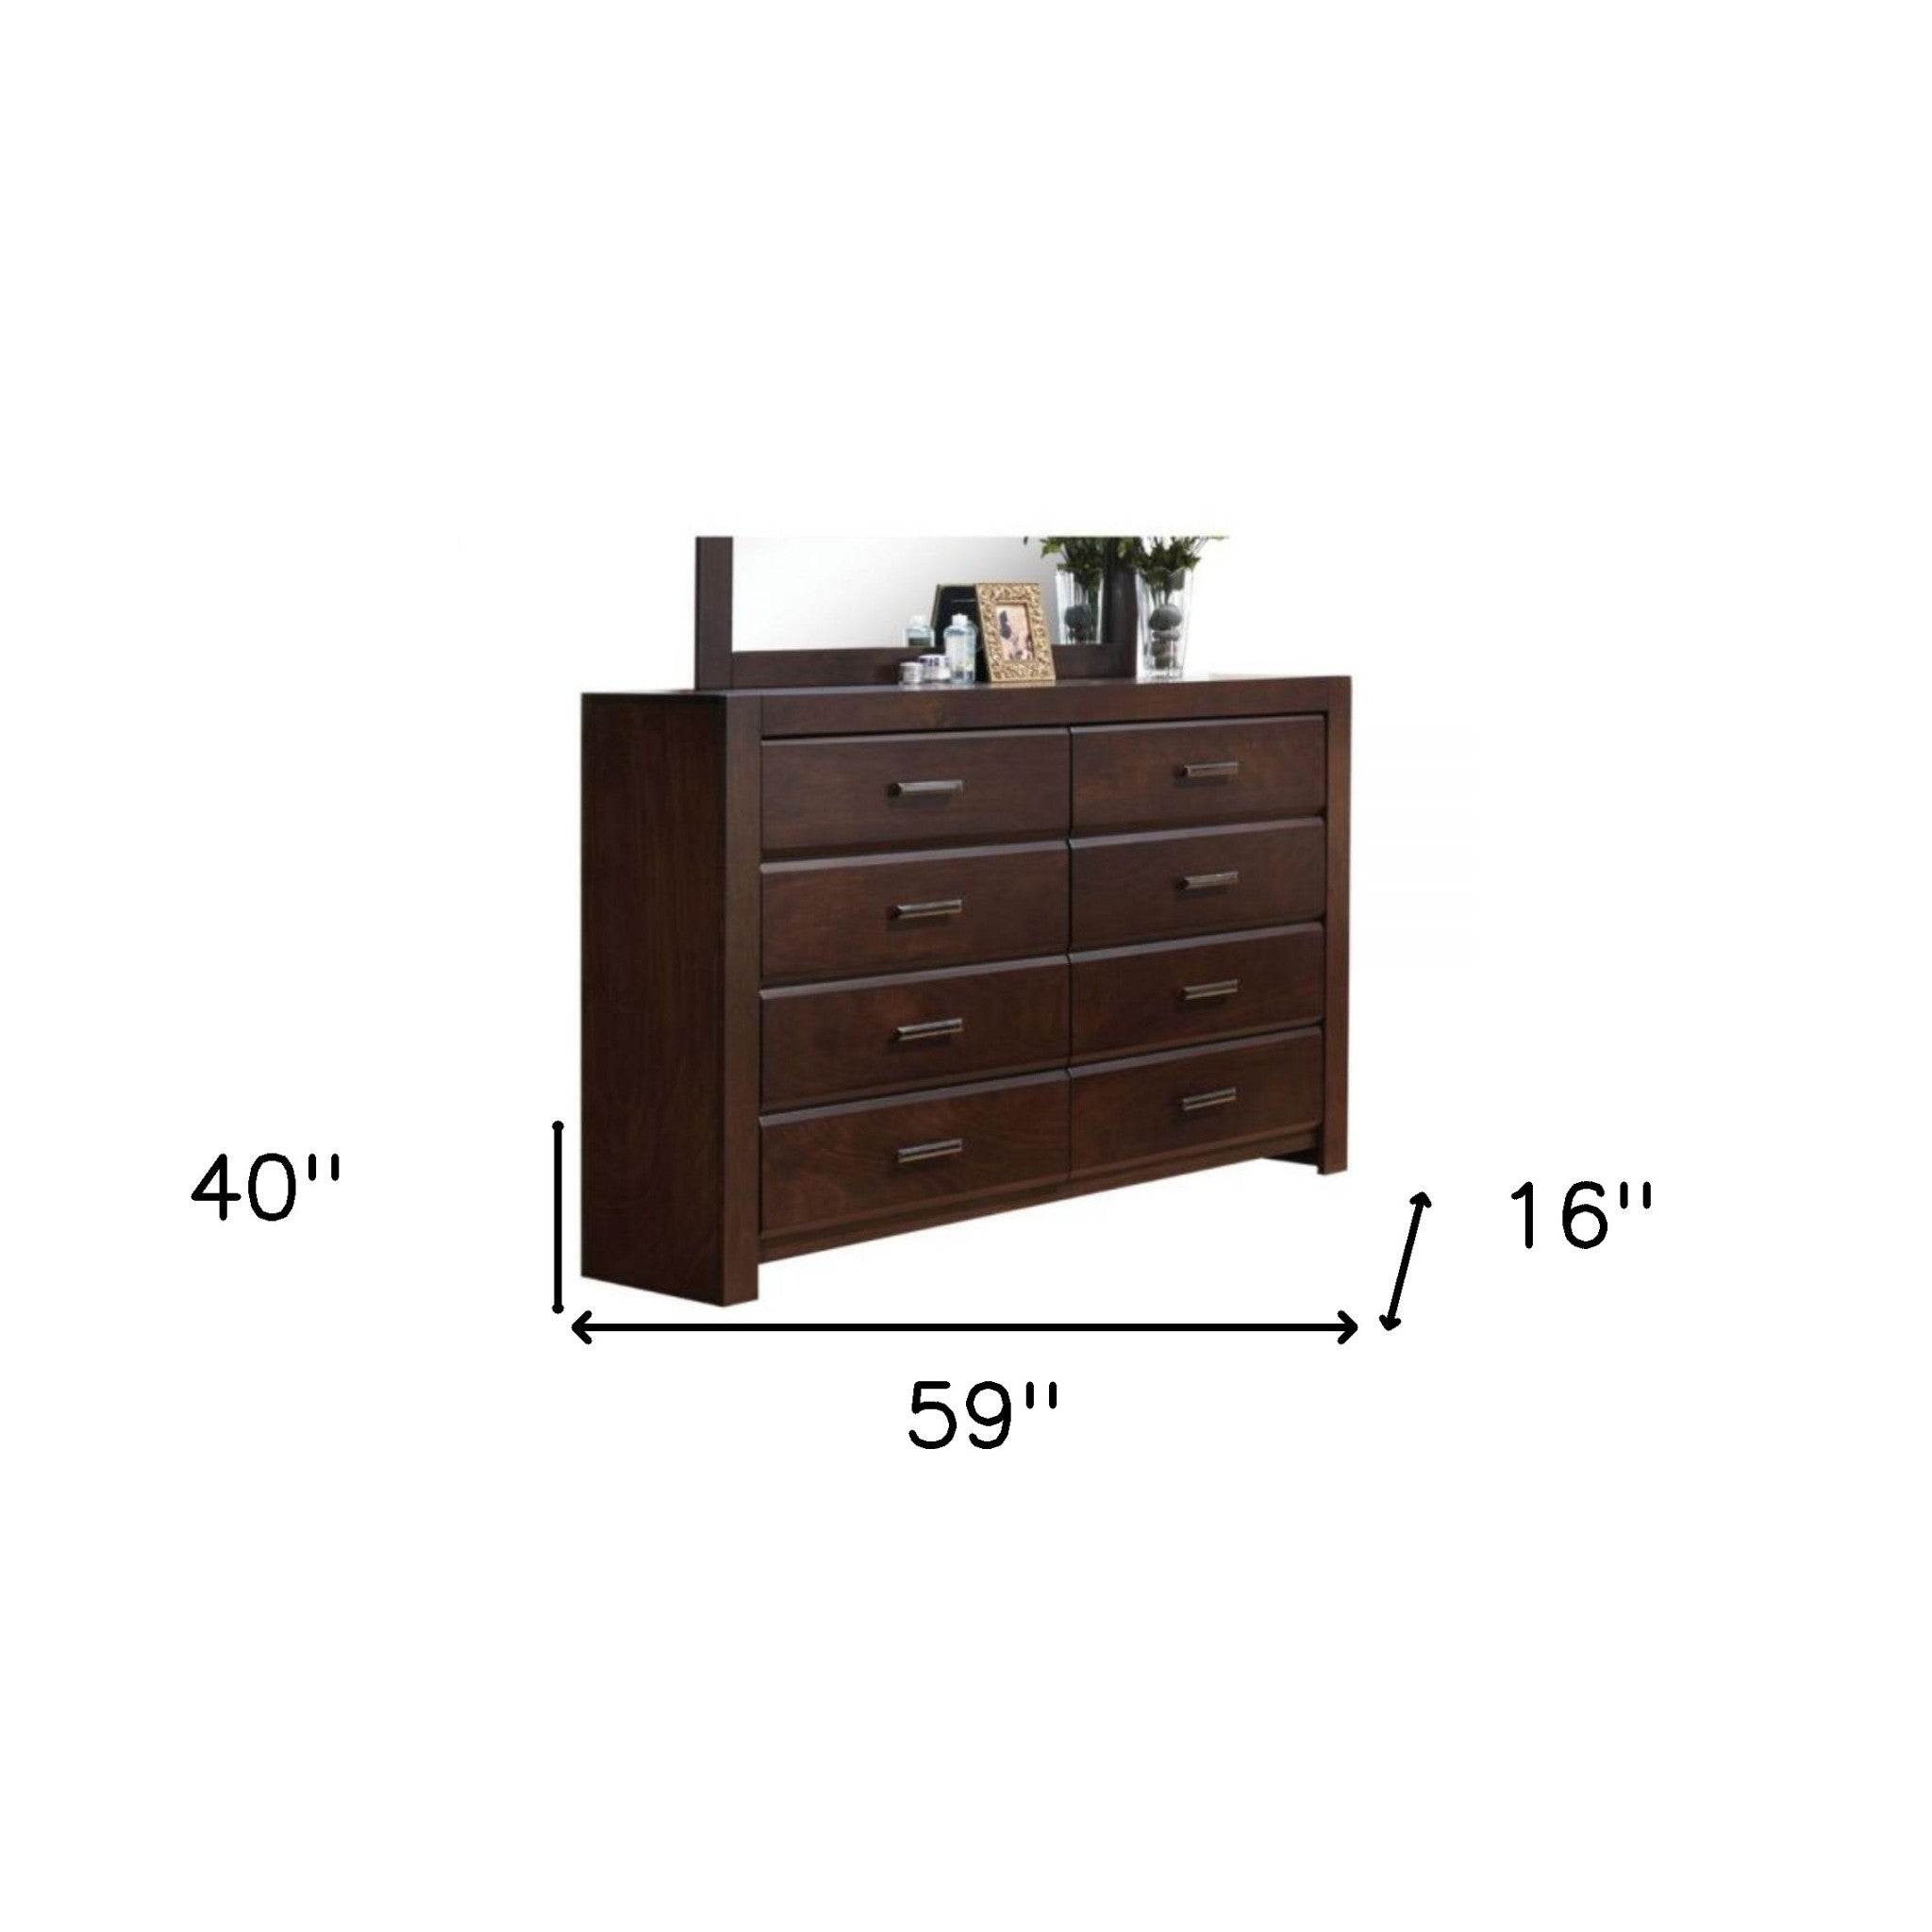 59" Brown Solid and Manufactured Wood Eight Drawer Double Dresser